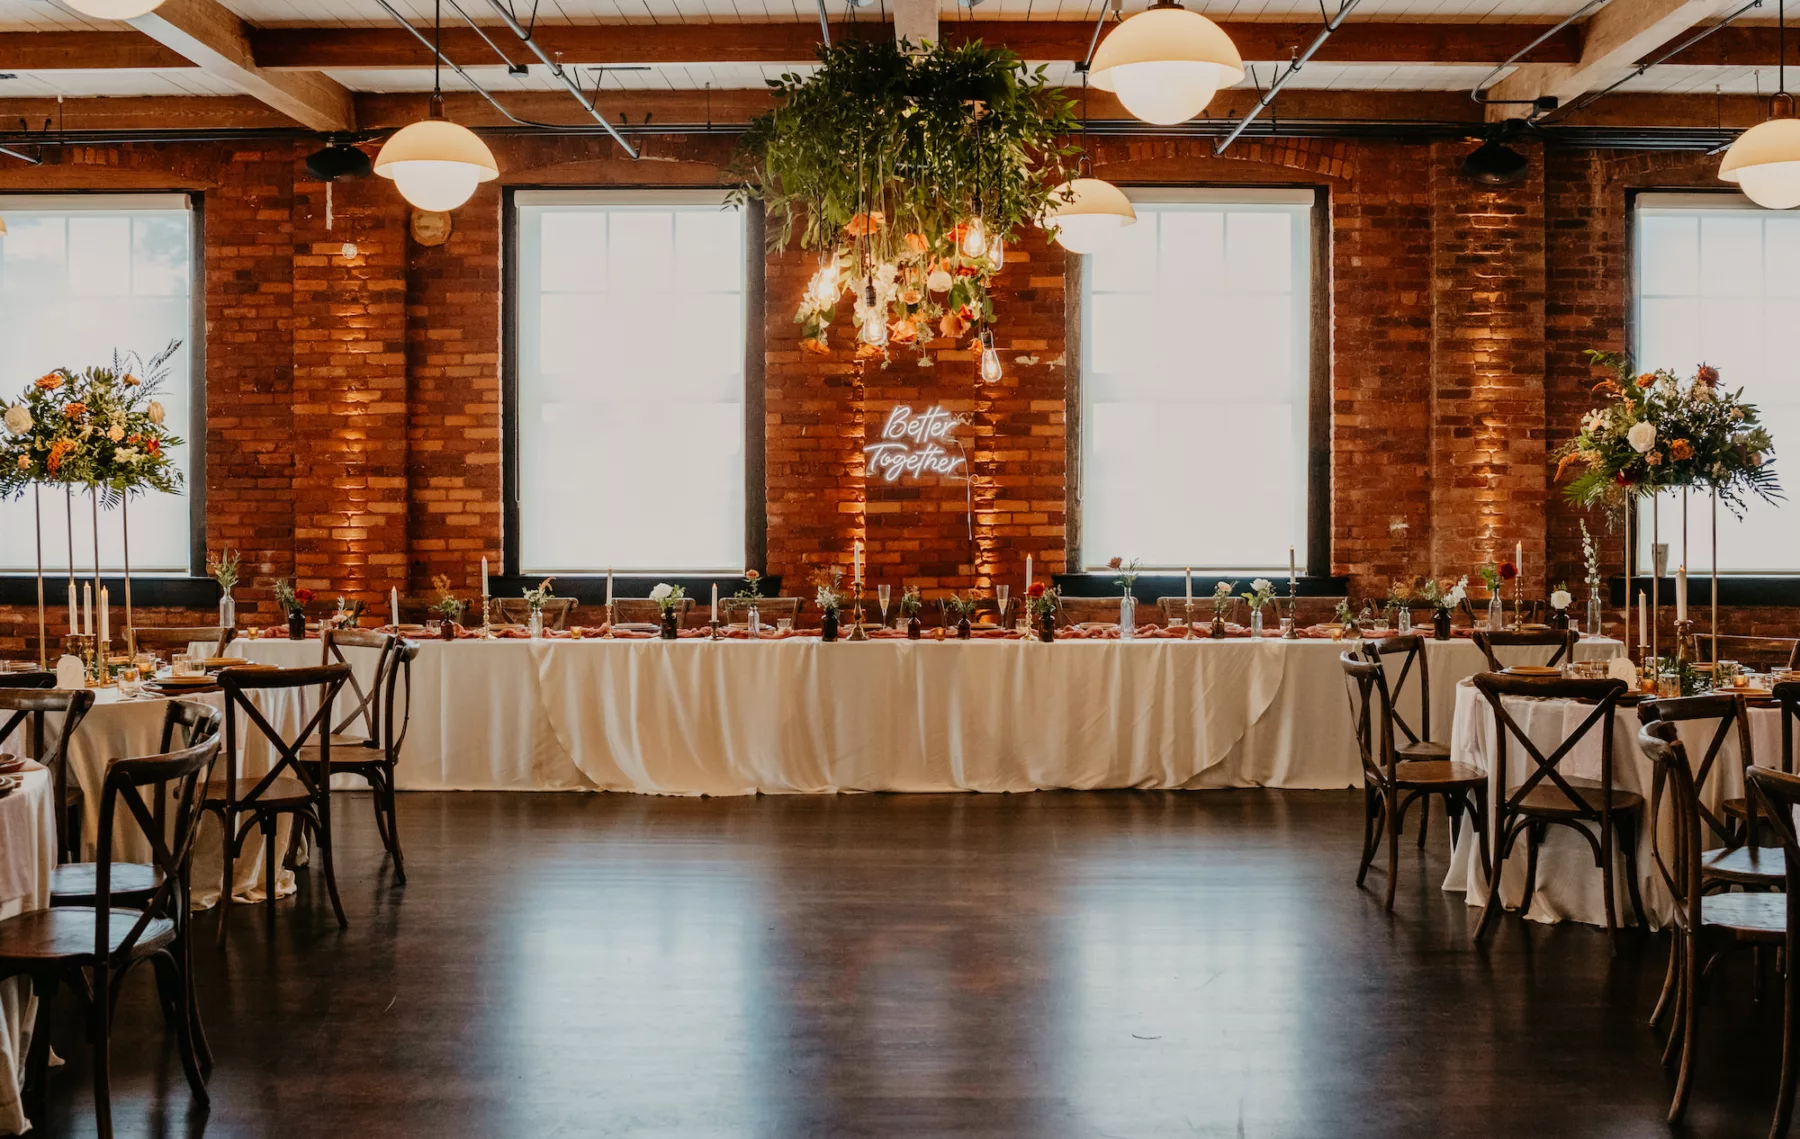 Long Feasting Table for Bridal Party | Industrial Wedding Reception Inspiration | Tampa Bay Planner B Eventful | Historic Industrial Venue J.C. Newman Cigar Co.